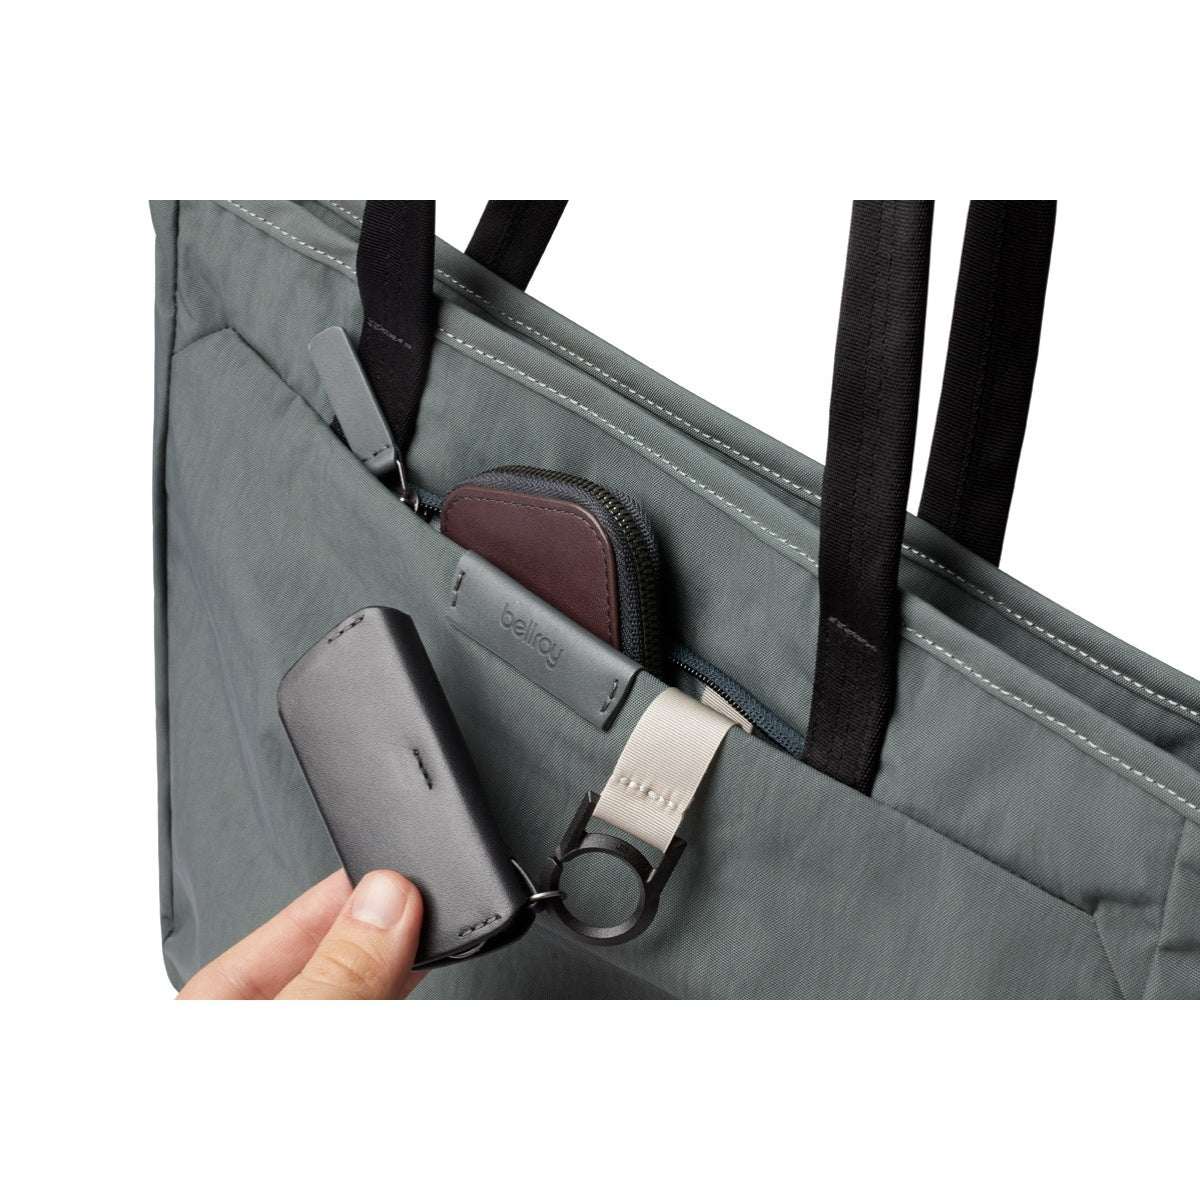 Bellroy Tokyo Tote Compact